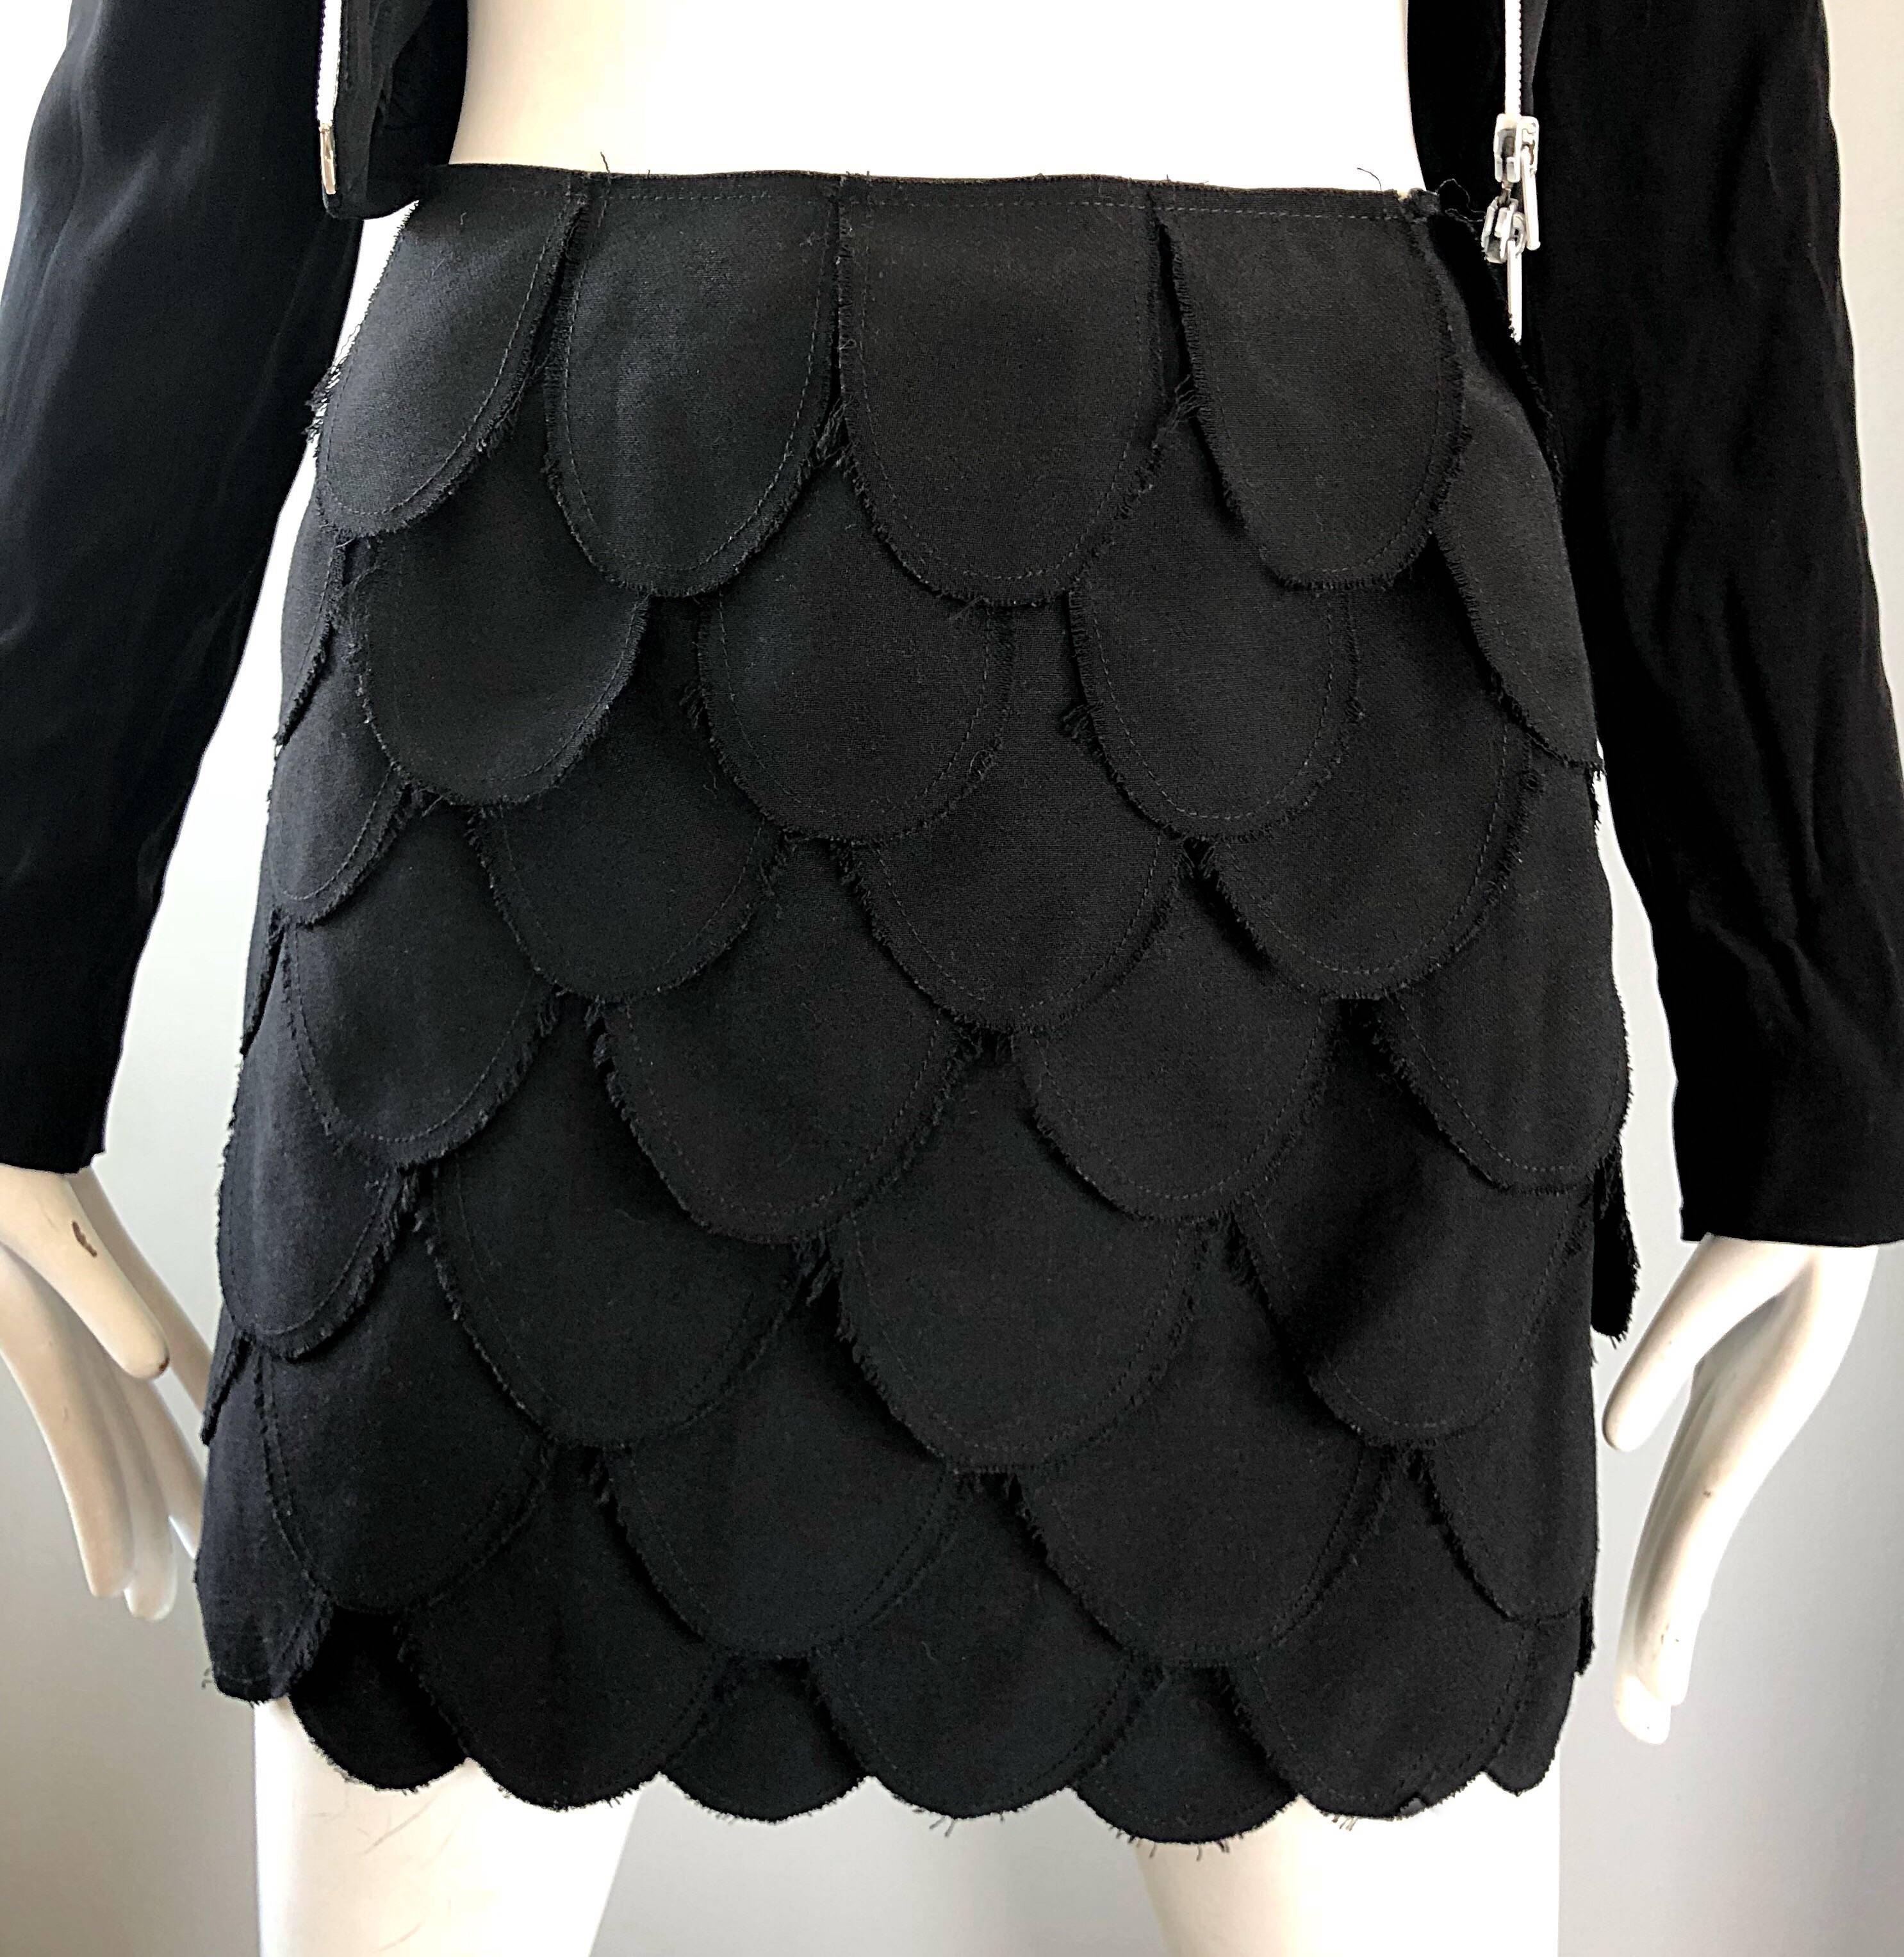 Moschino Cheap & Chic Vintage 90s Black Size 4 Carwash Fringe Mini Skirt In Excellent Condition For Sale In San Diego, CA